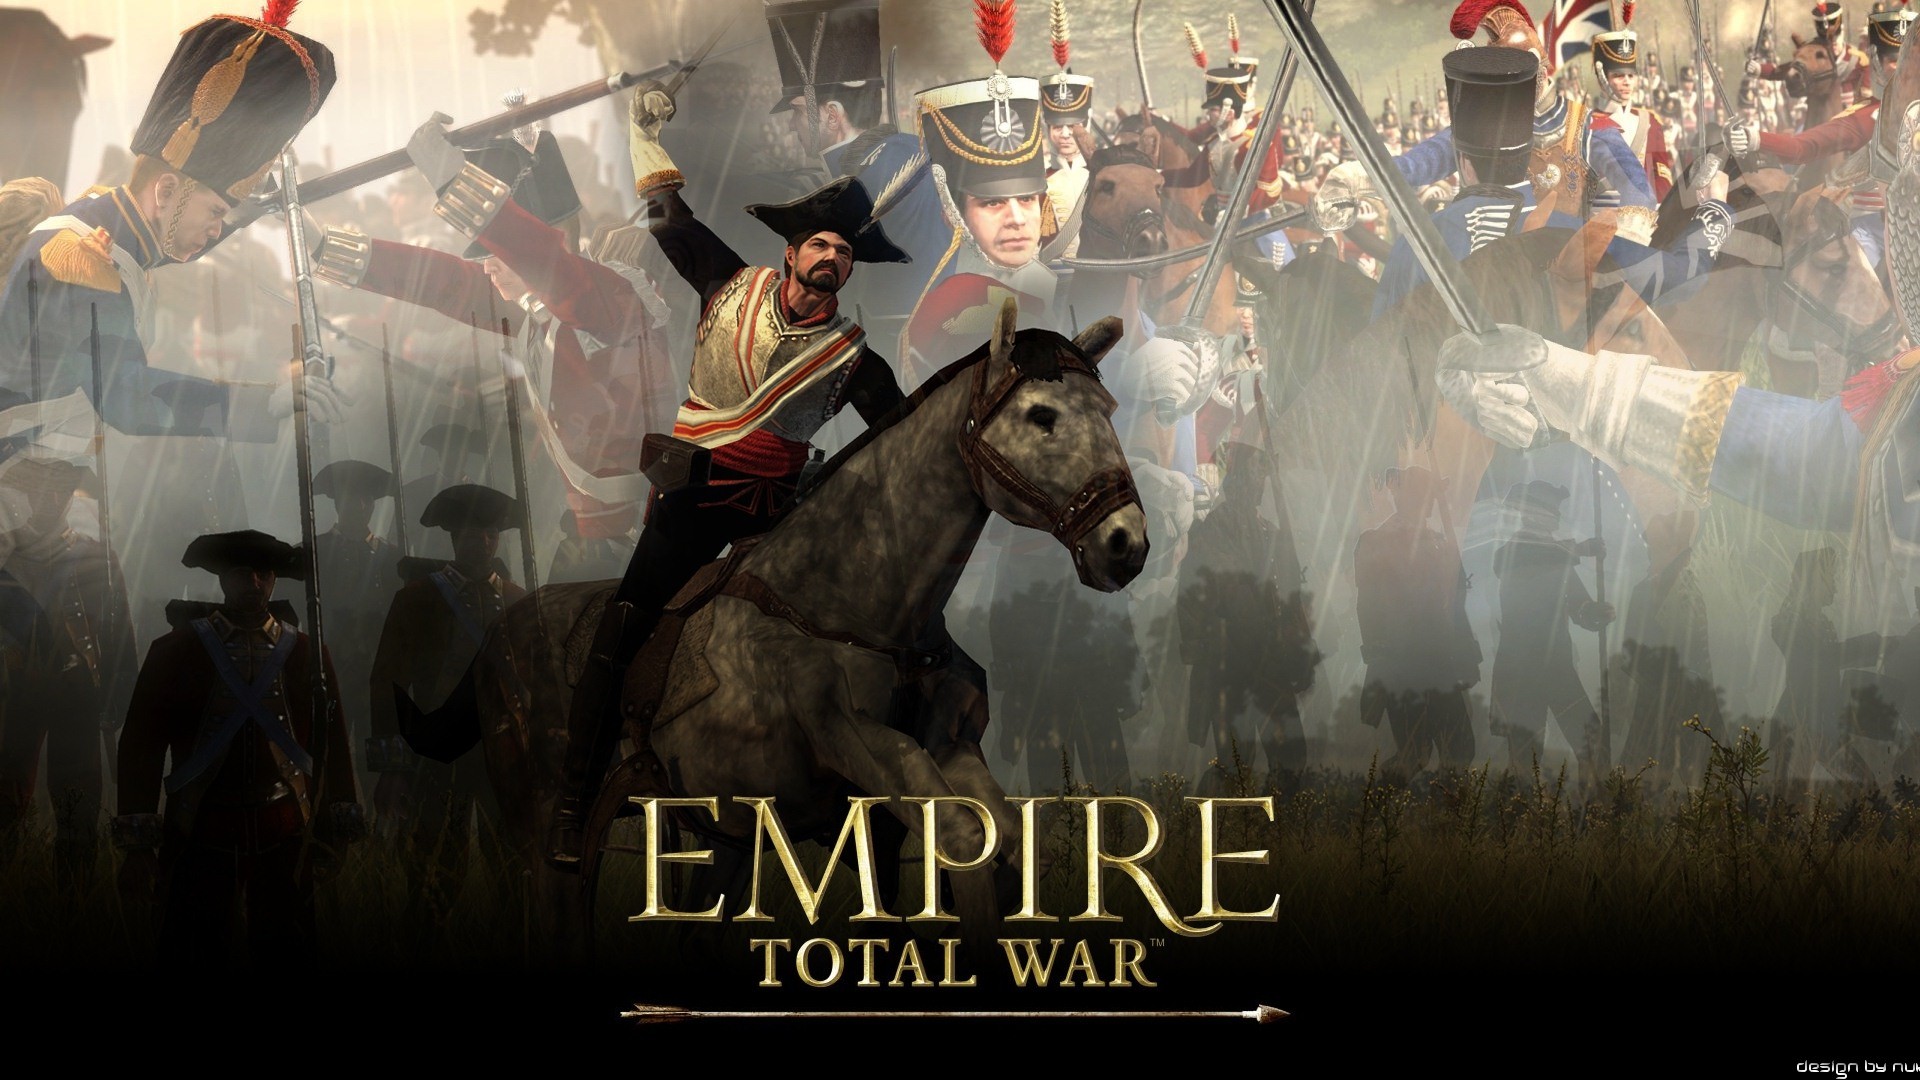 1920x1080 Movies Wallpaper Empire Total War Wallpapers Background with HD | HD  Wallpapers | Pinterest | Empire total war, Total war and Wallpaper